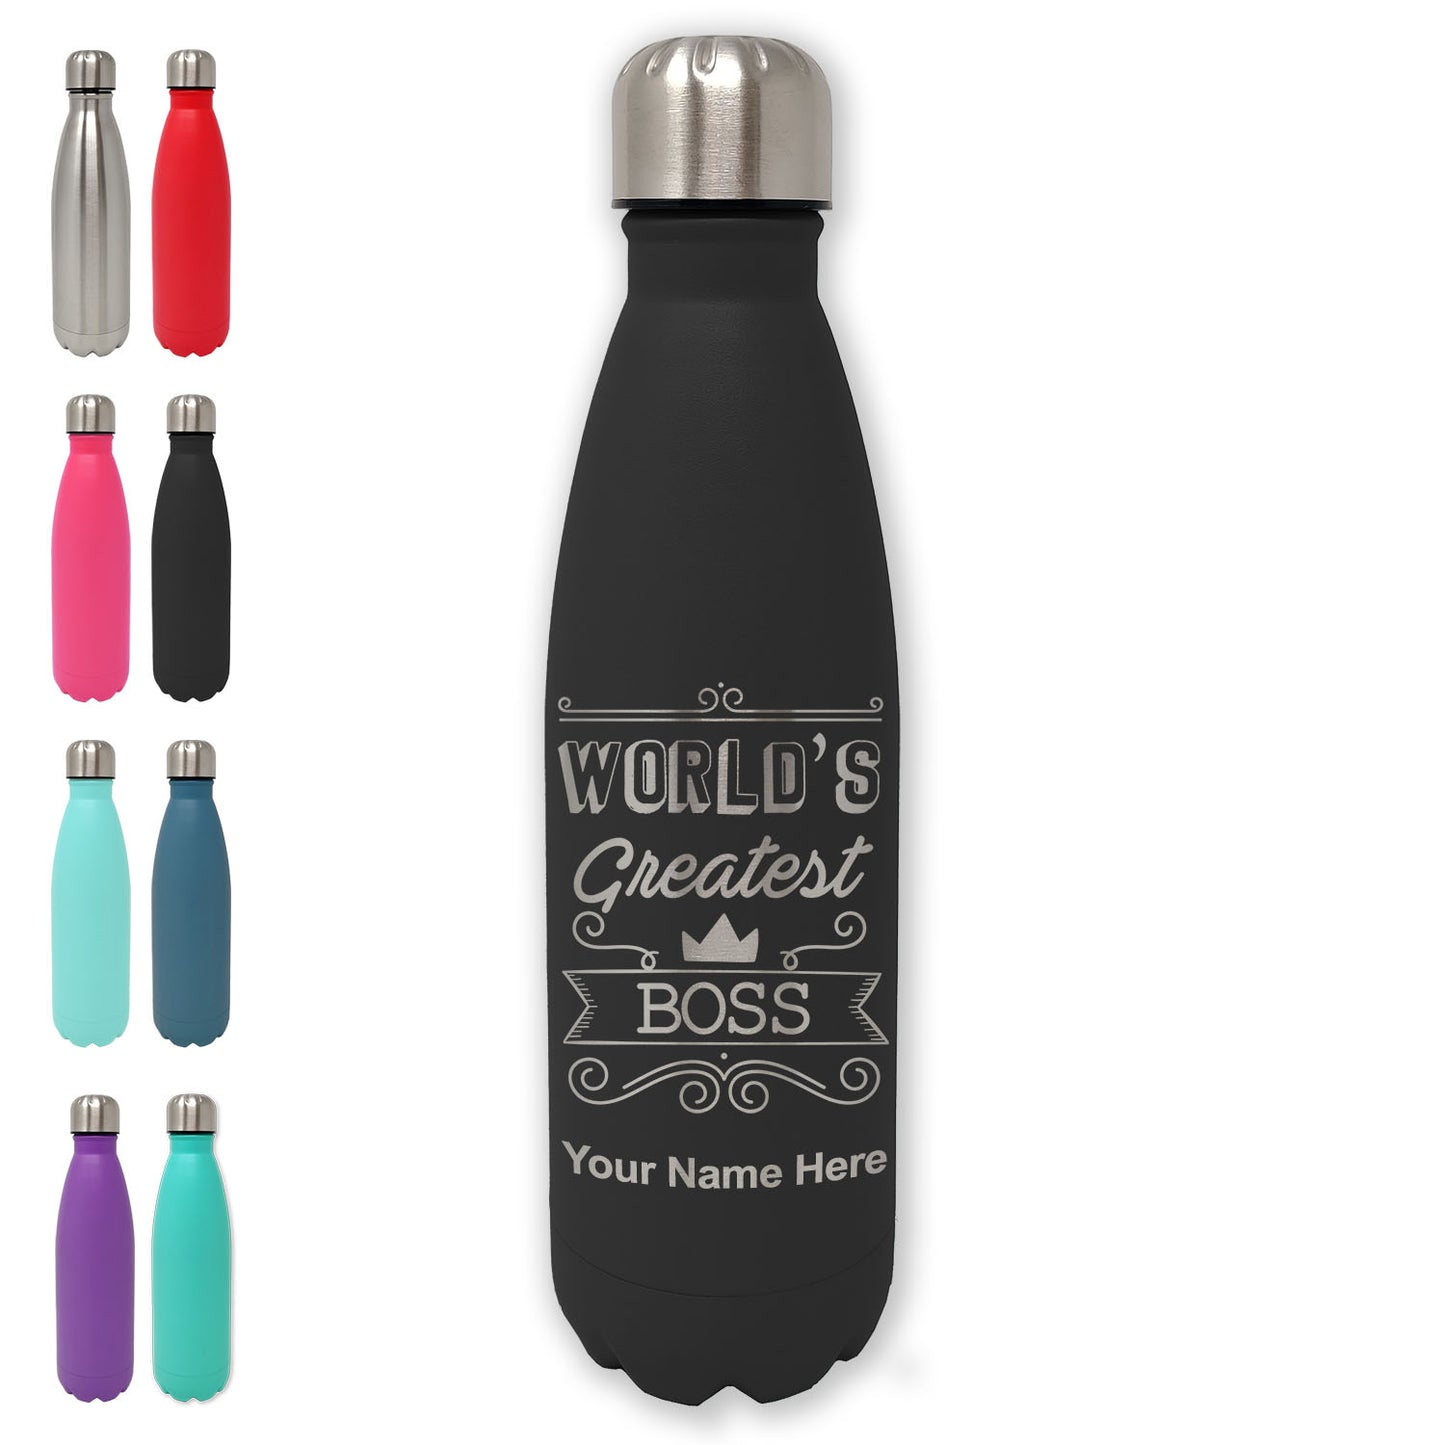 LaserGram Double Wall Water Bottle, World's Greatest Boss, Personalized Engraving Included